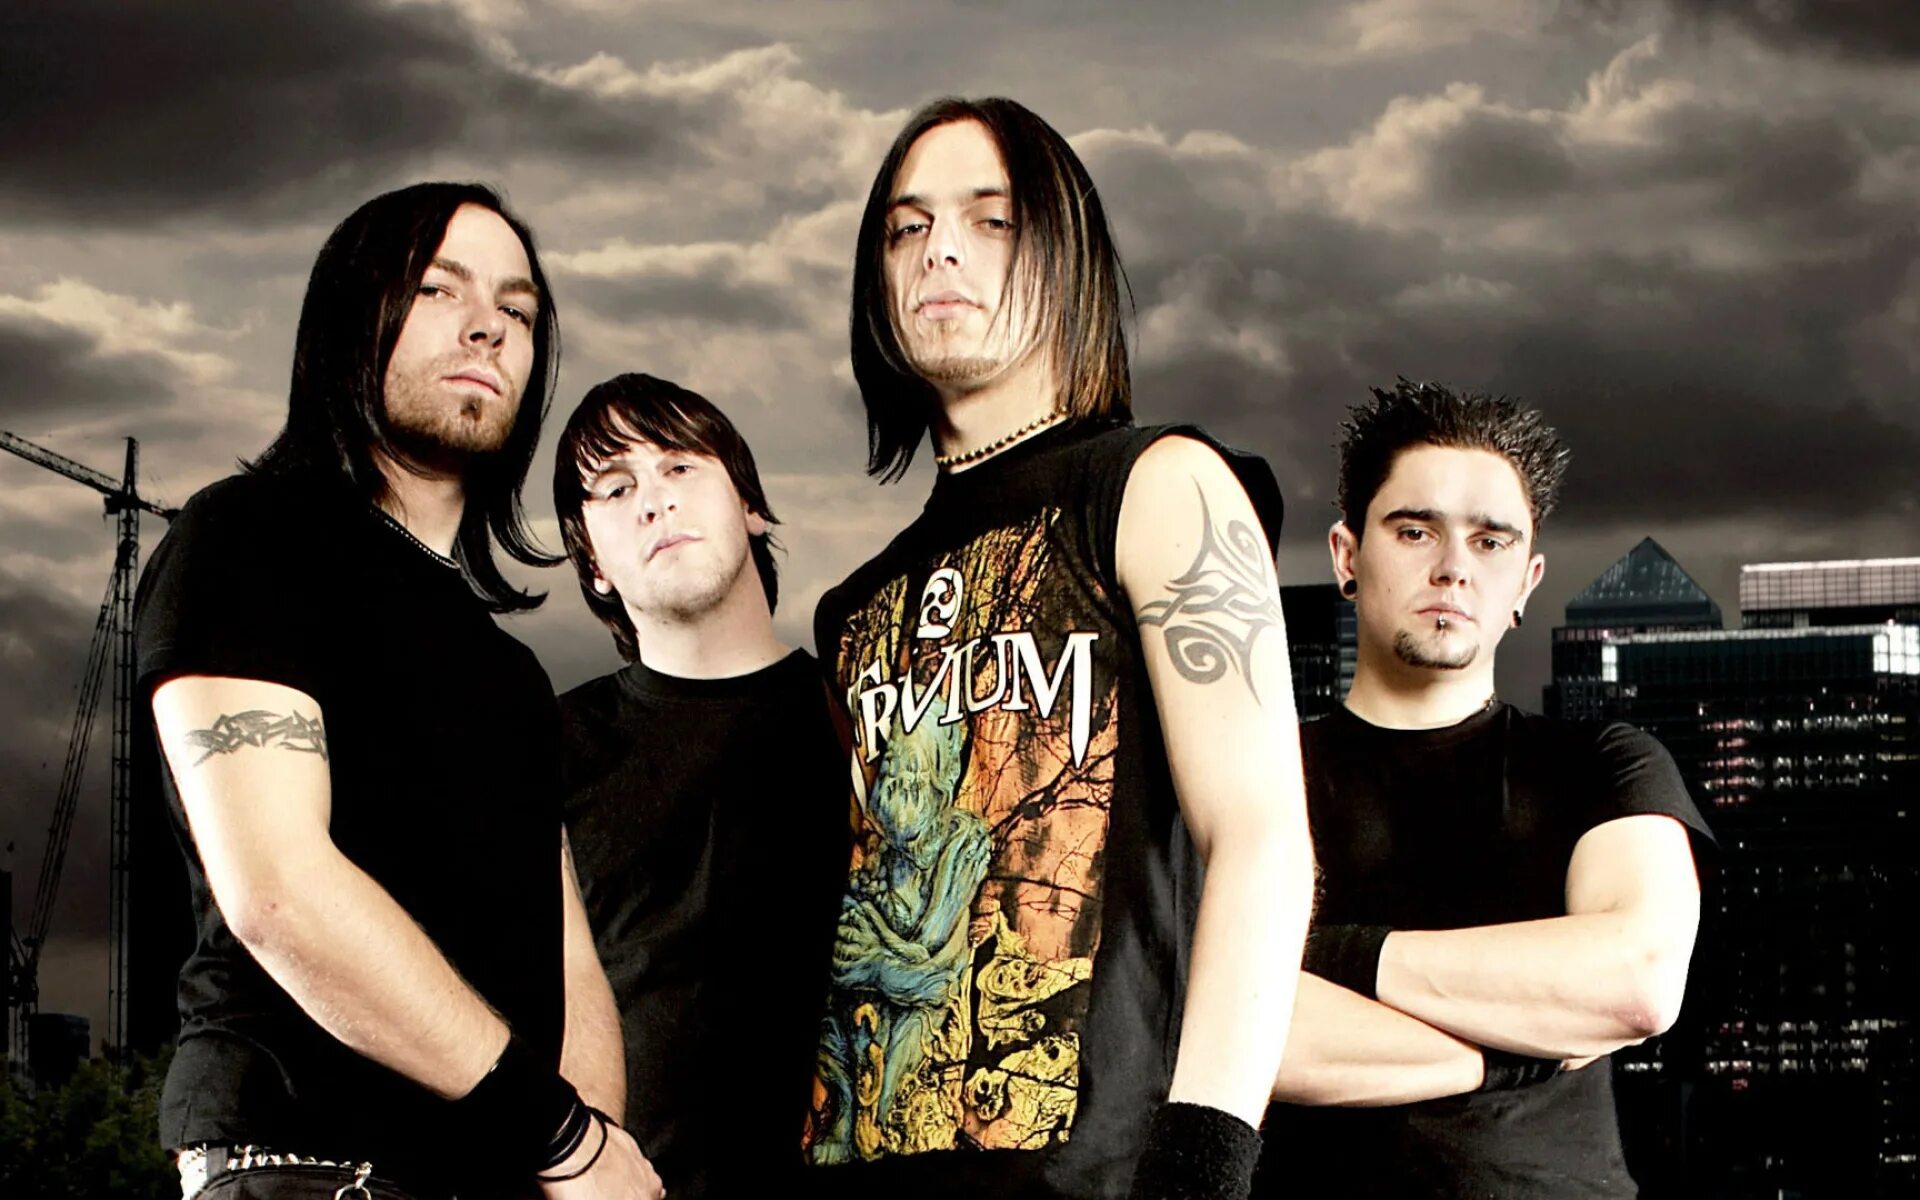 Session fora. Группа Bullet for my Valentine. Группа Bullet for my Valentine 2005. Группа Bullet for my Valentine 2021.